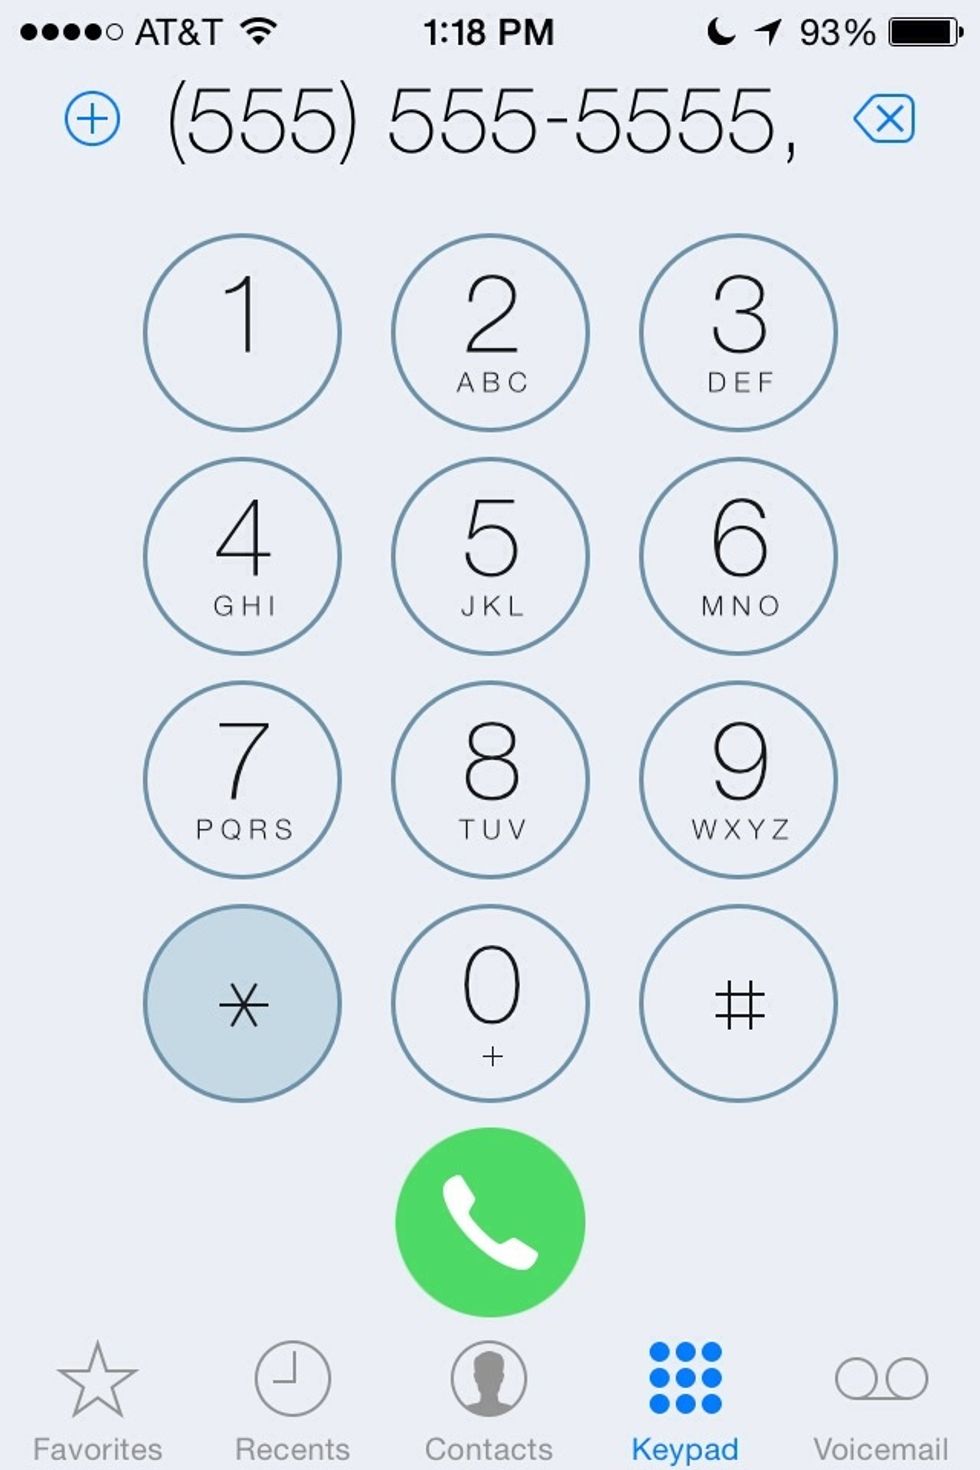 How to save extension number to contact number on iphone - B+C Guides